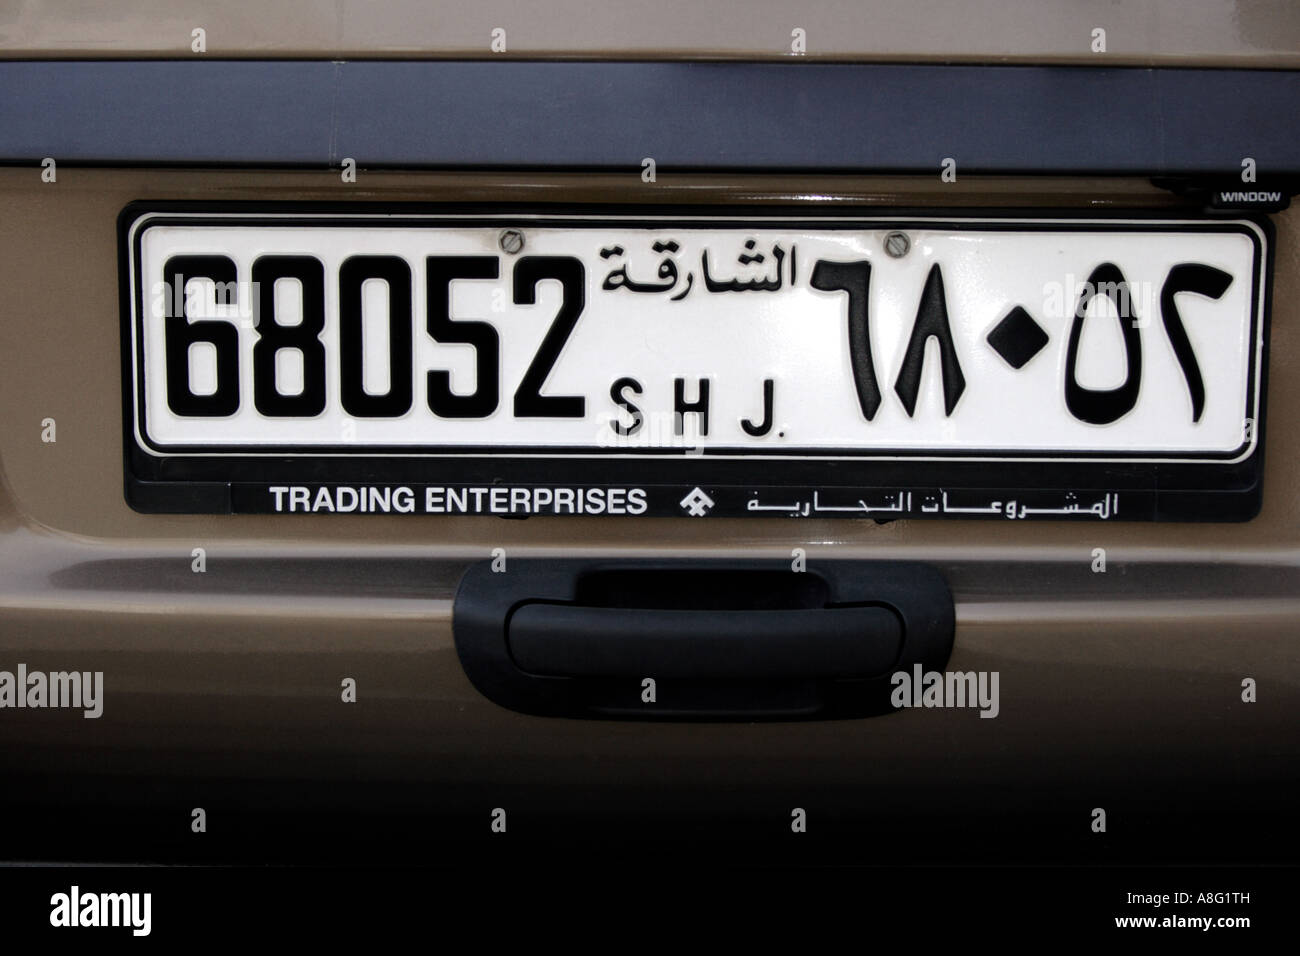 Sharjah UAE car license plate. Photo by Willy Matheisl Stock Photo